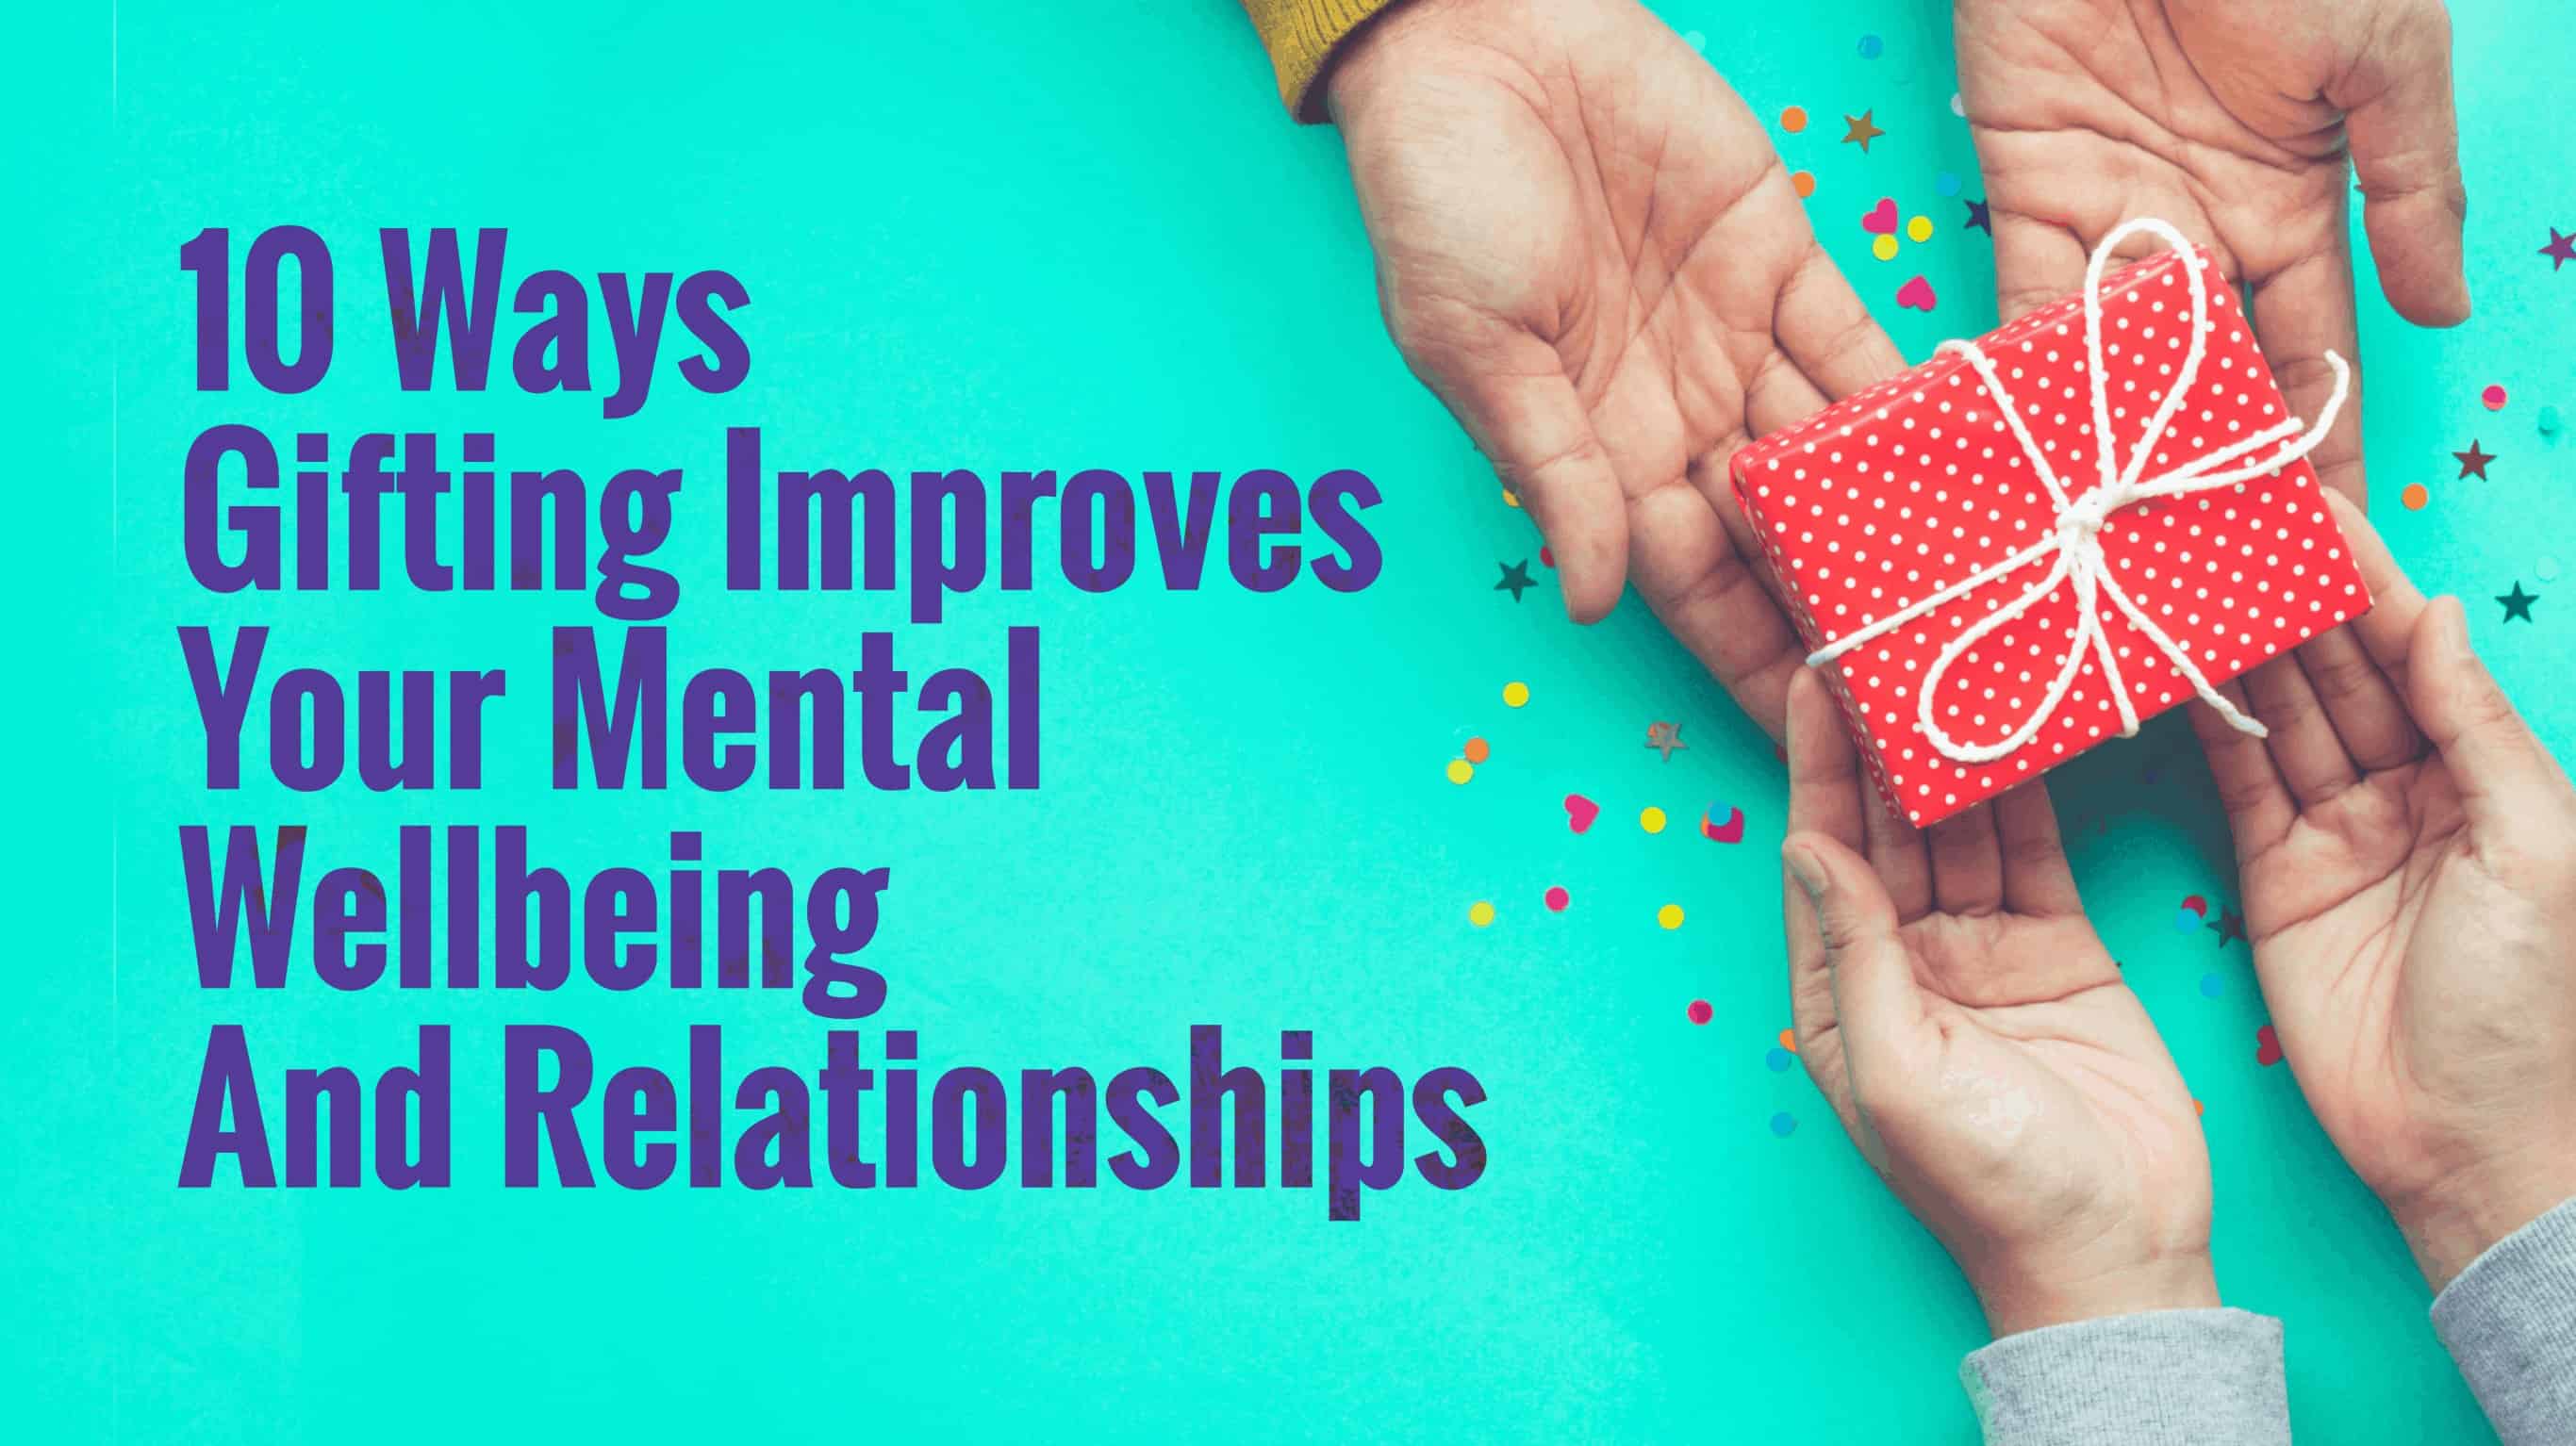 10 Ways Gifting Improves Your Mental Wellbeing And Relationships